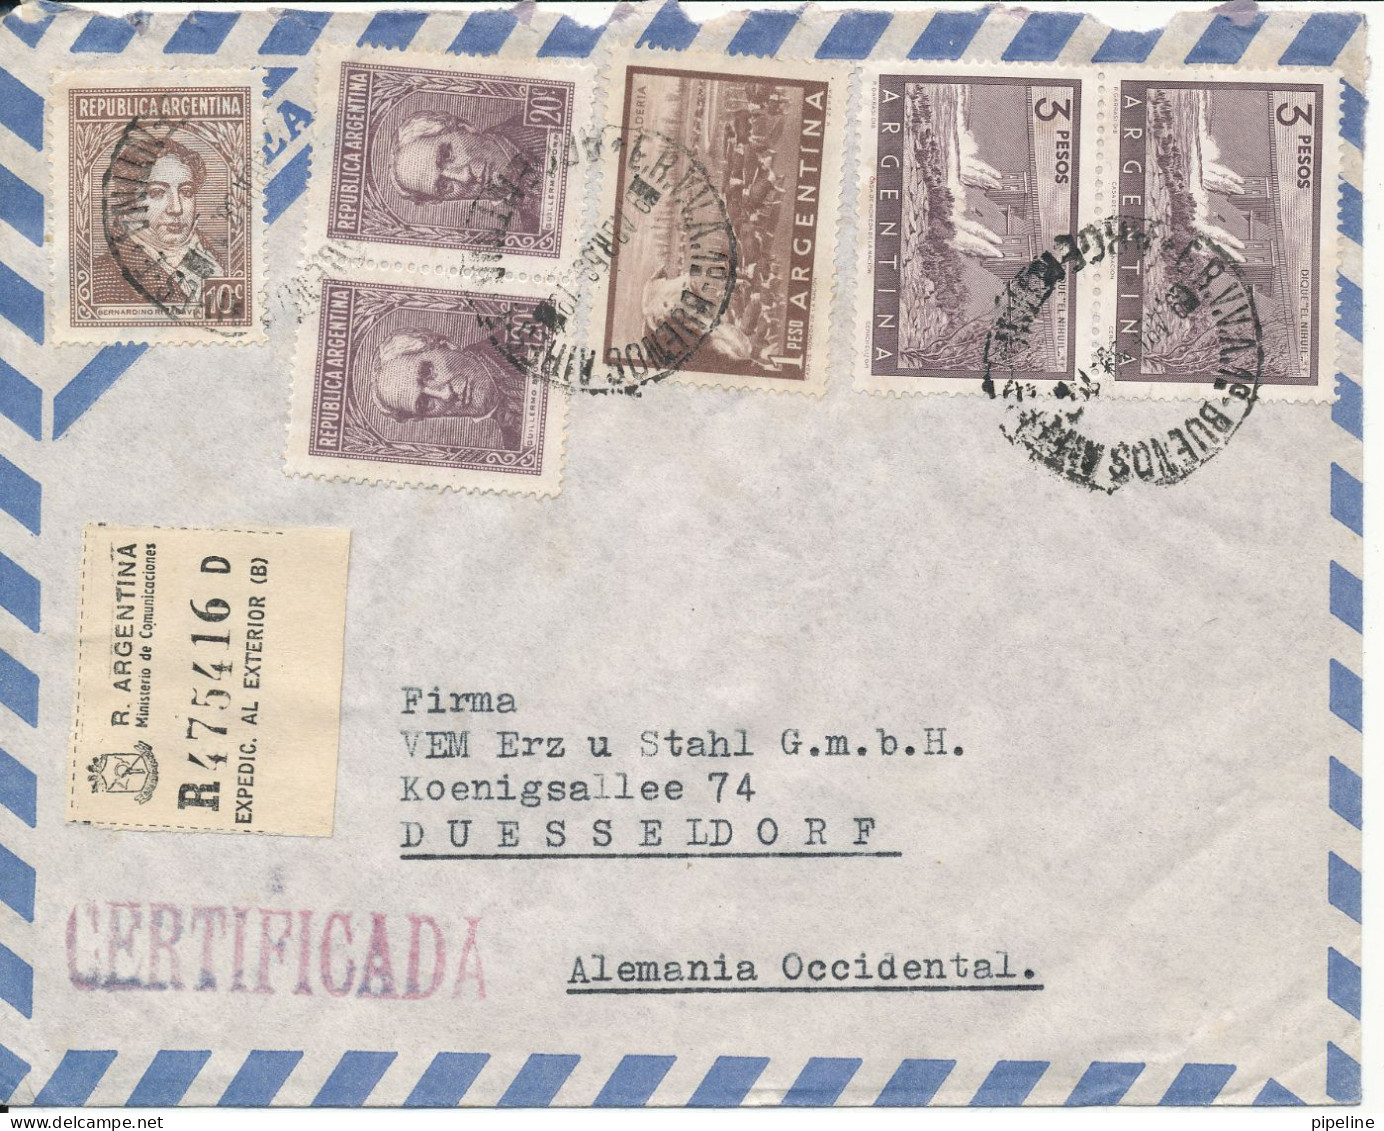 Argentina Registered Air Mail Cover Sent To Germany 9-4-1956 With More Stamps - Poste Aérienne